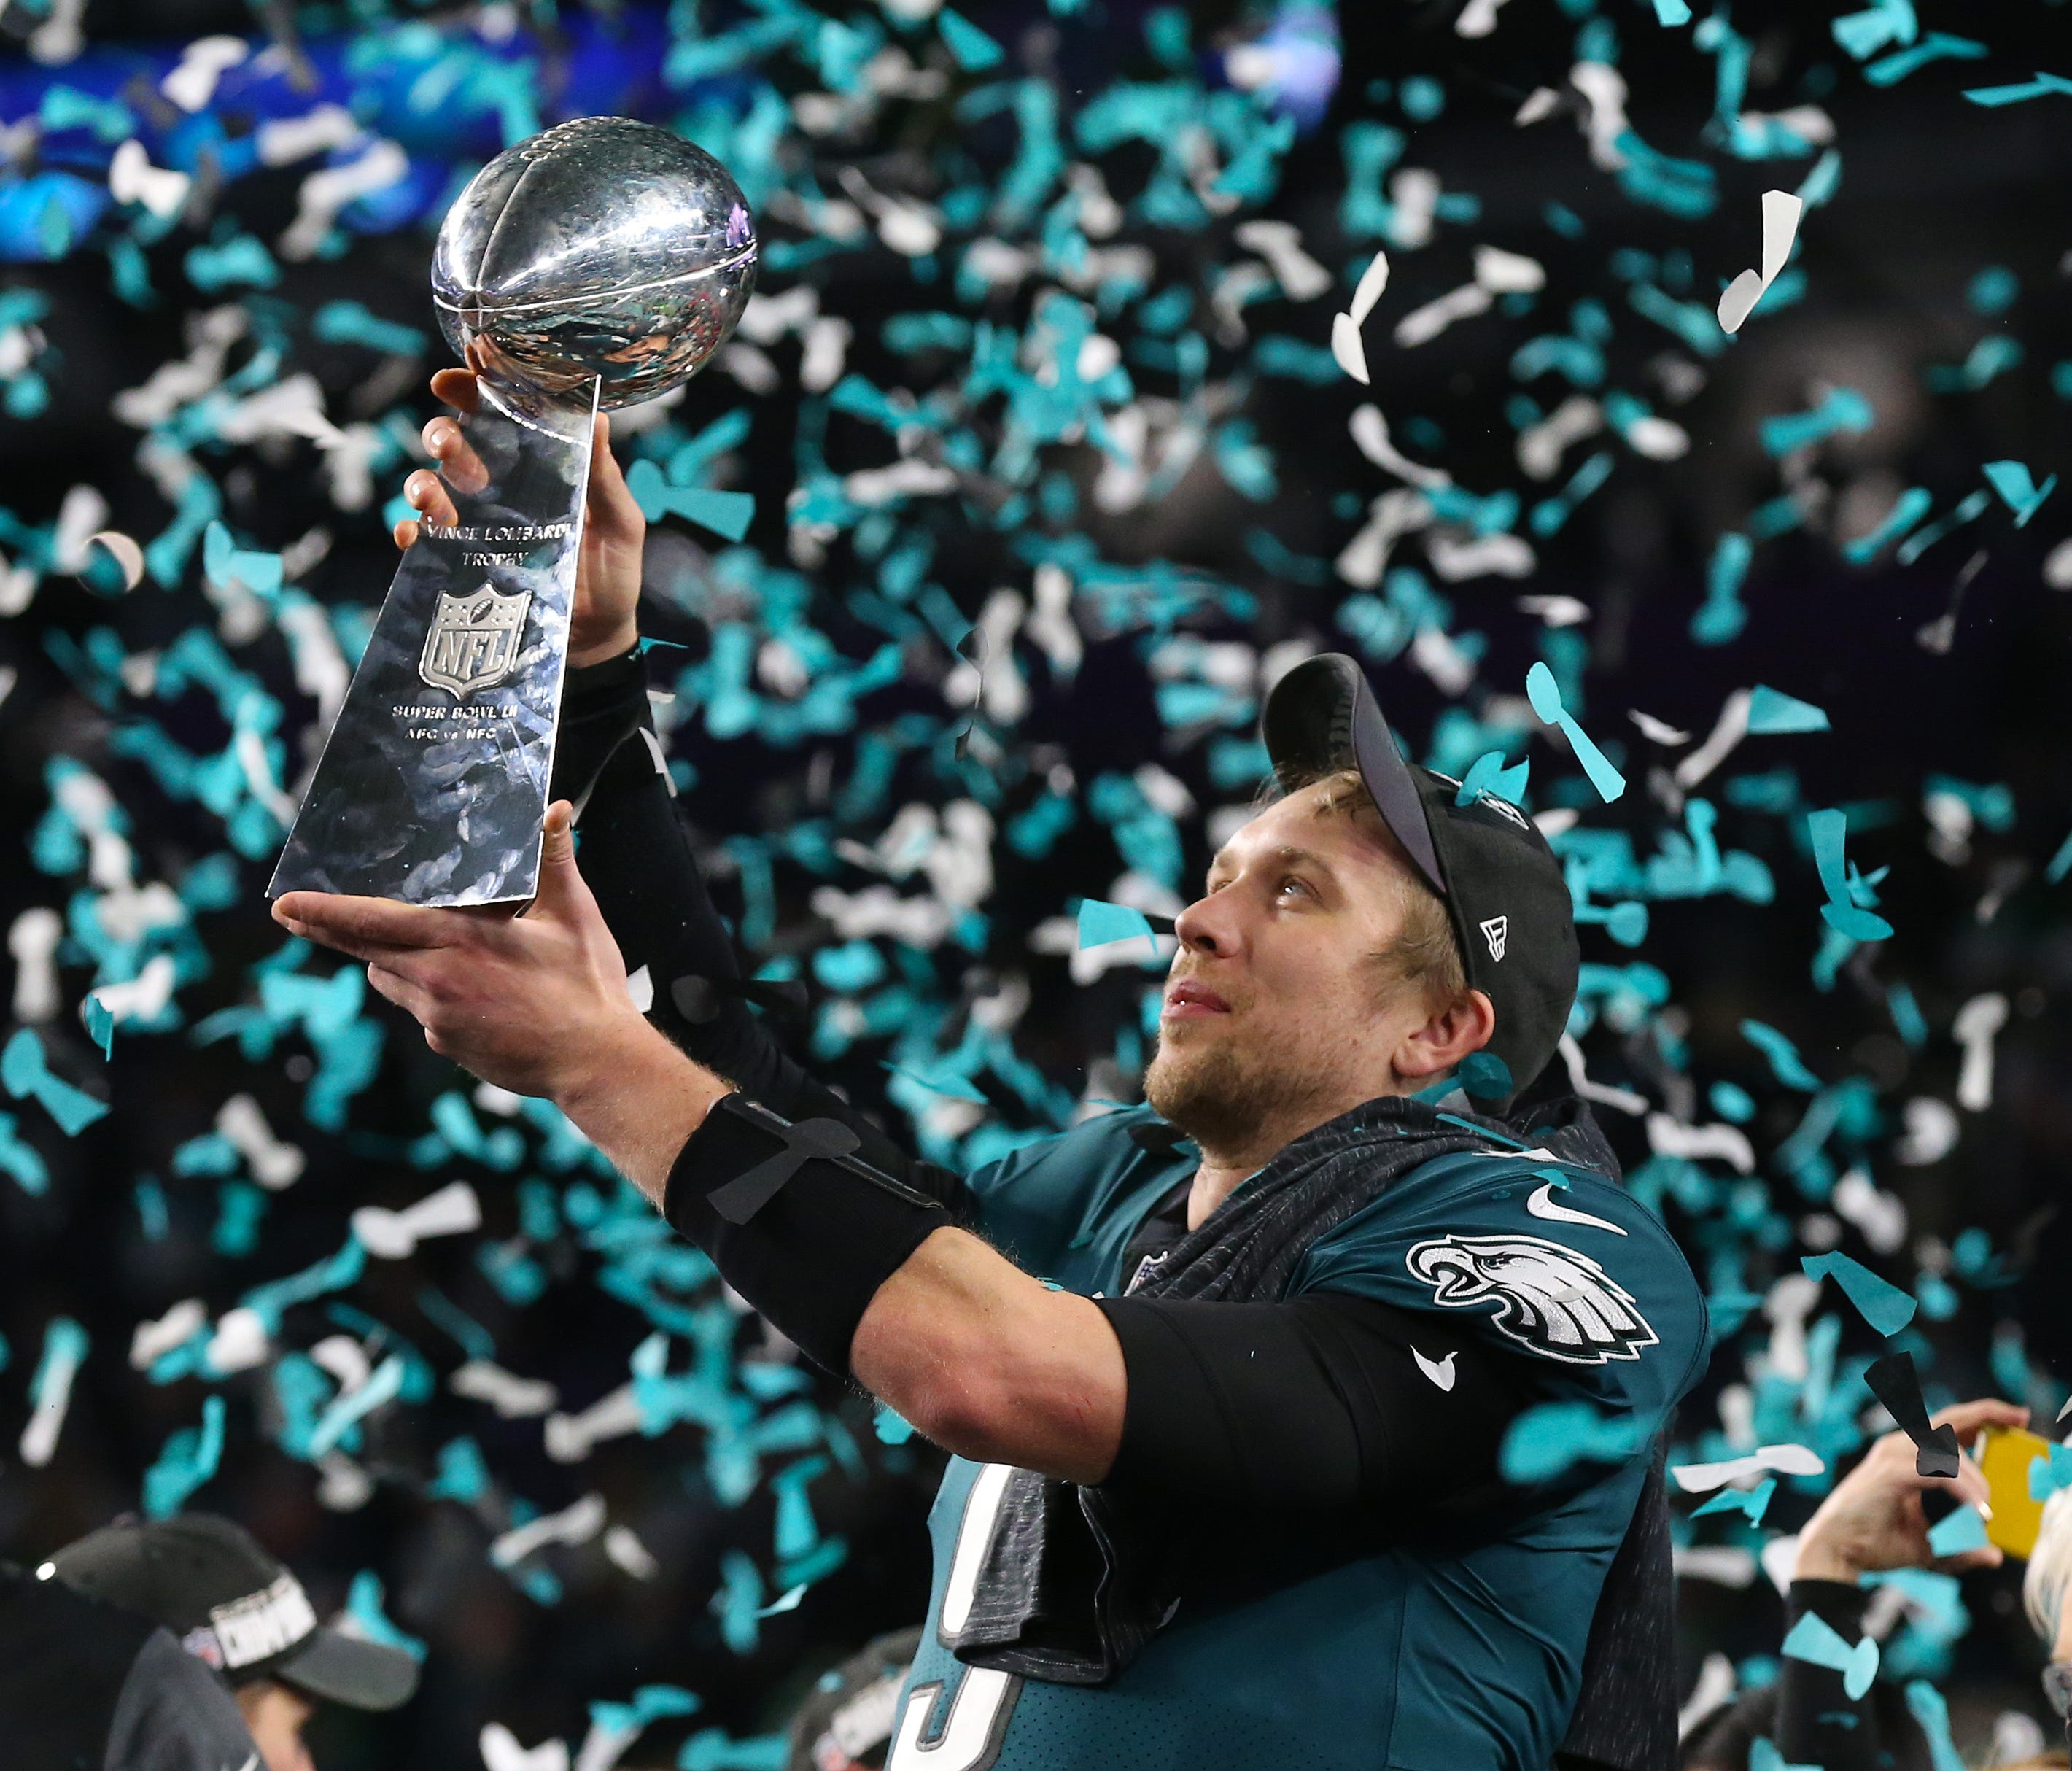 Nick Foles led the Eagles to their first Super Bowl win and fourth NFL championship in franchise history.